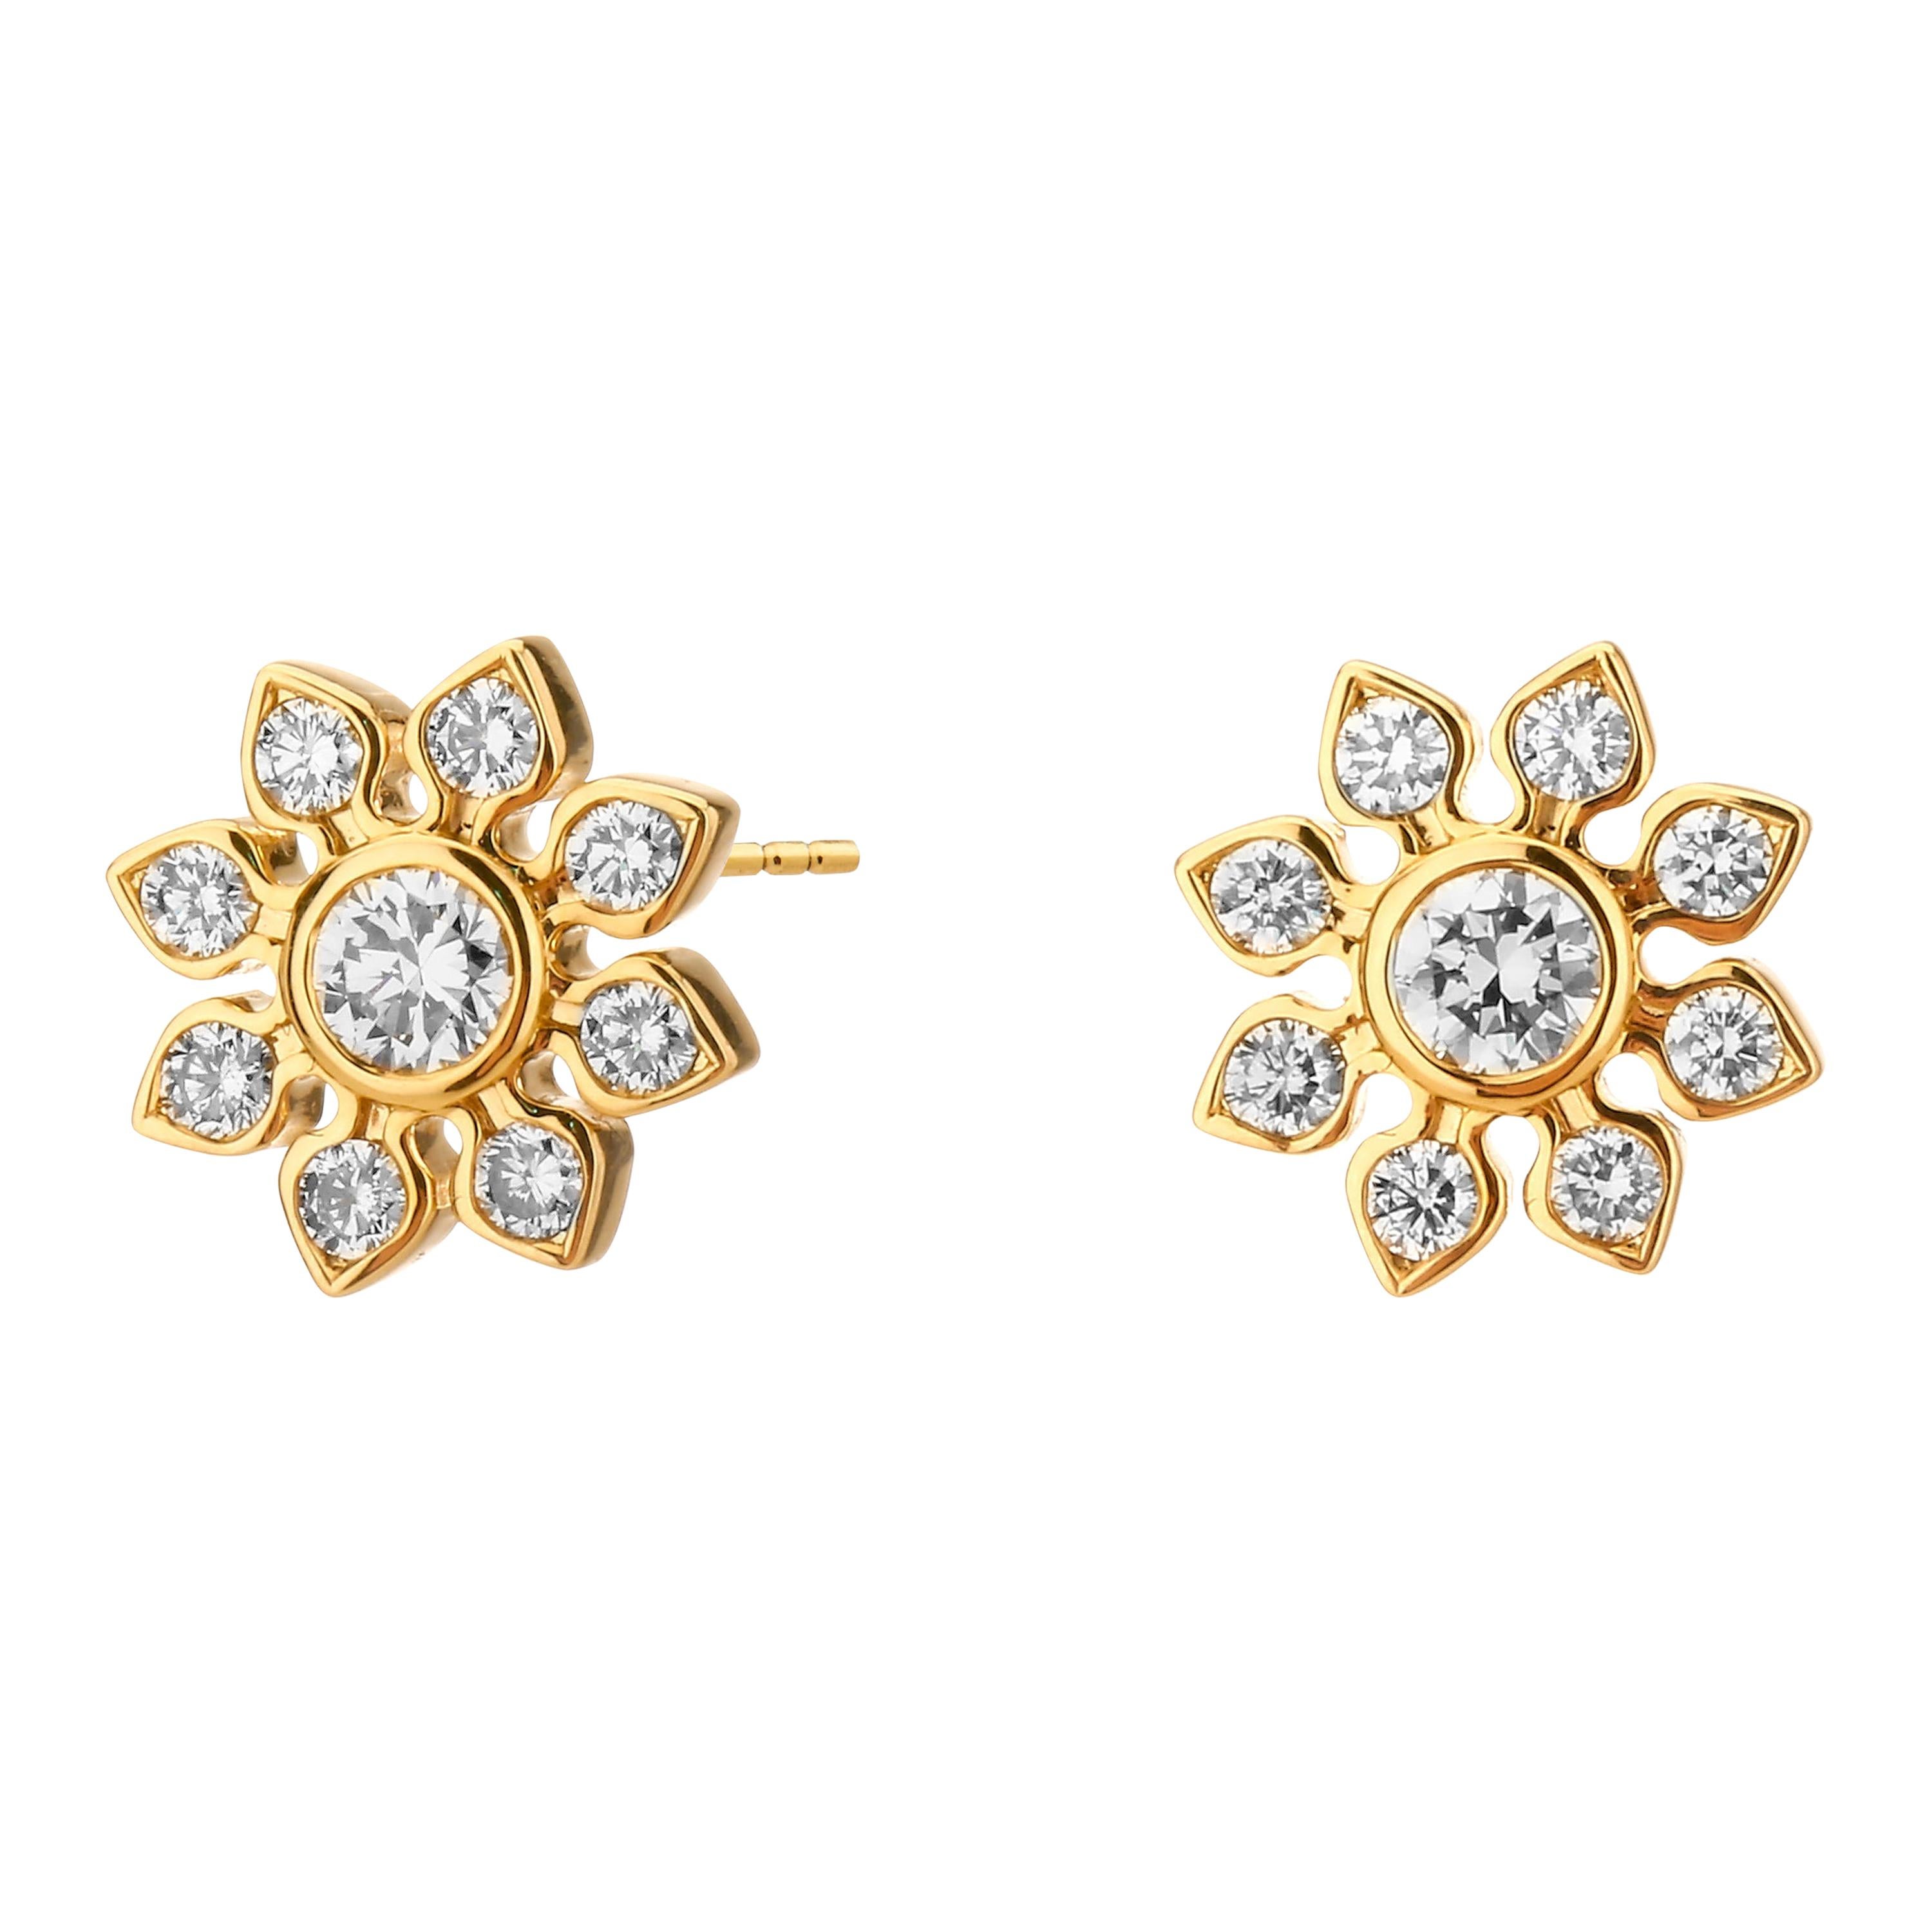 Syna Yellow Gold and Diamond Earrings